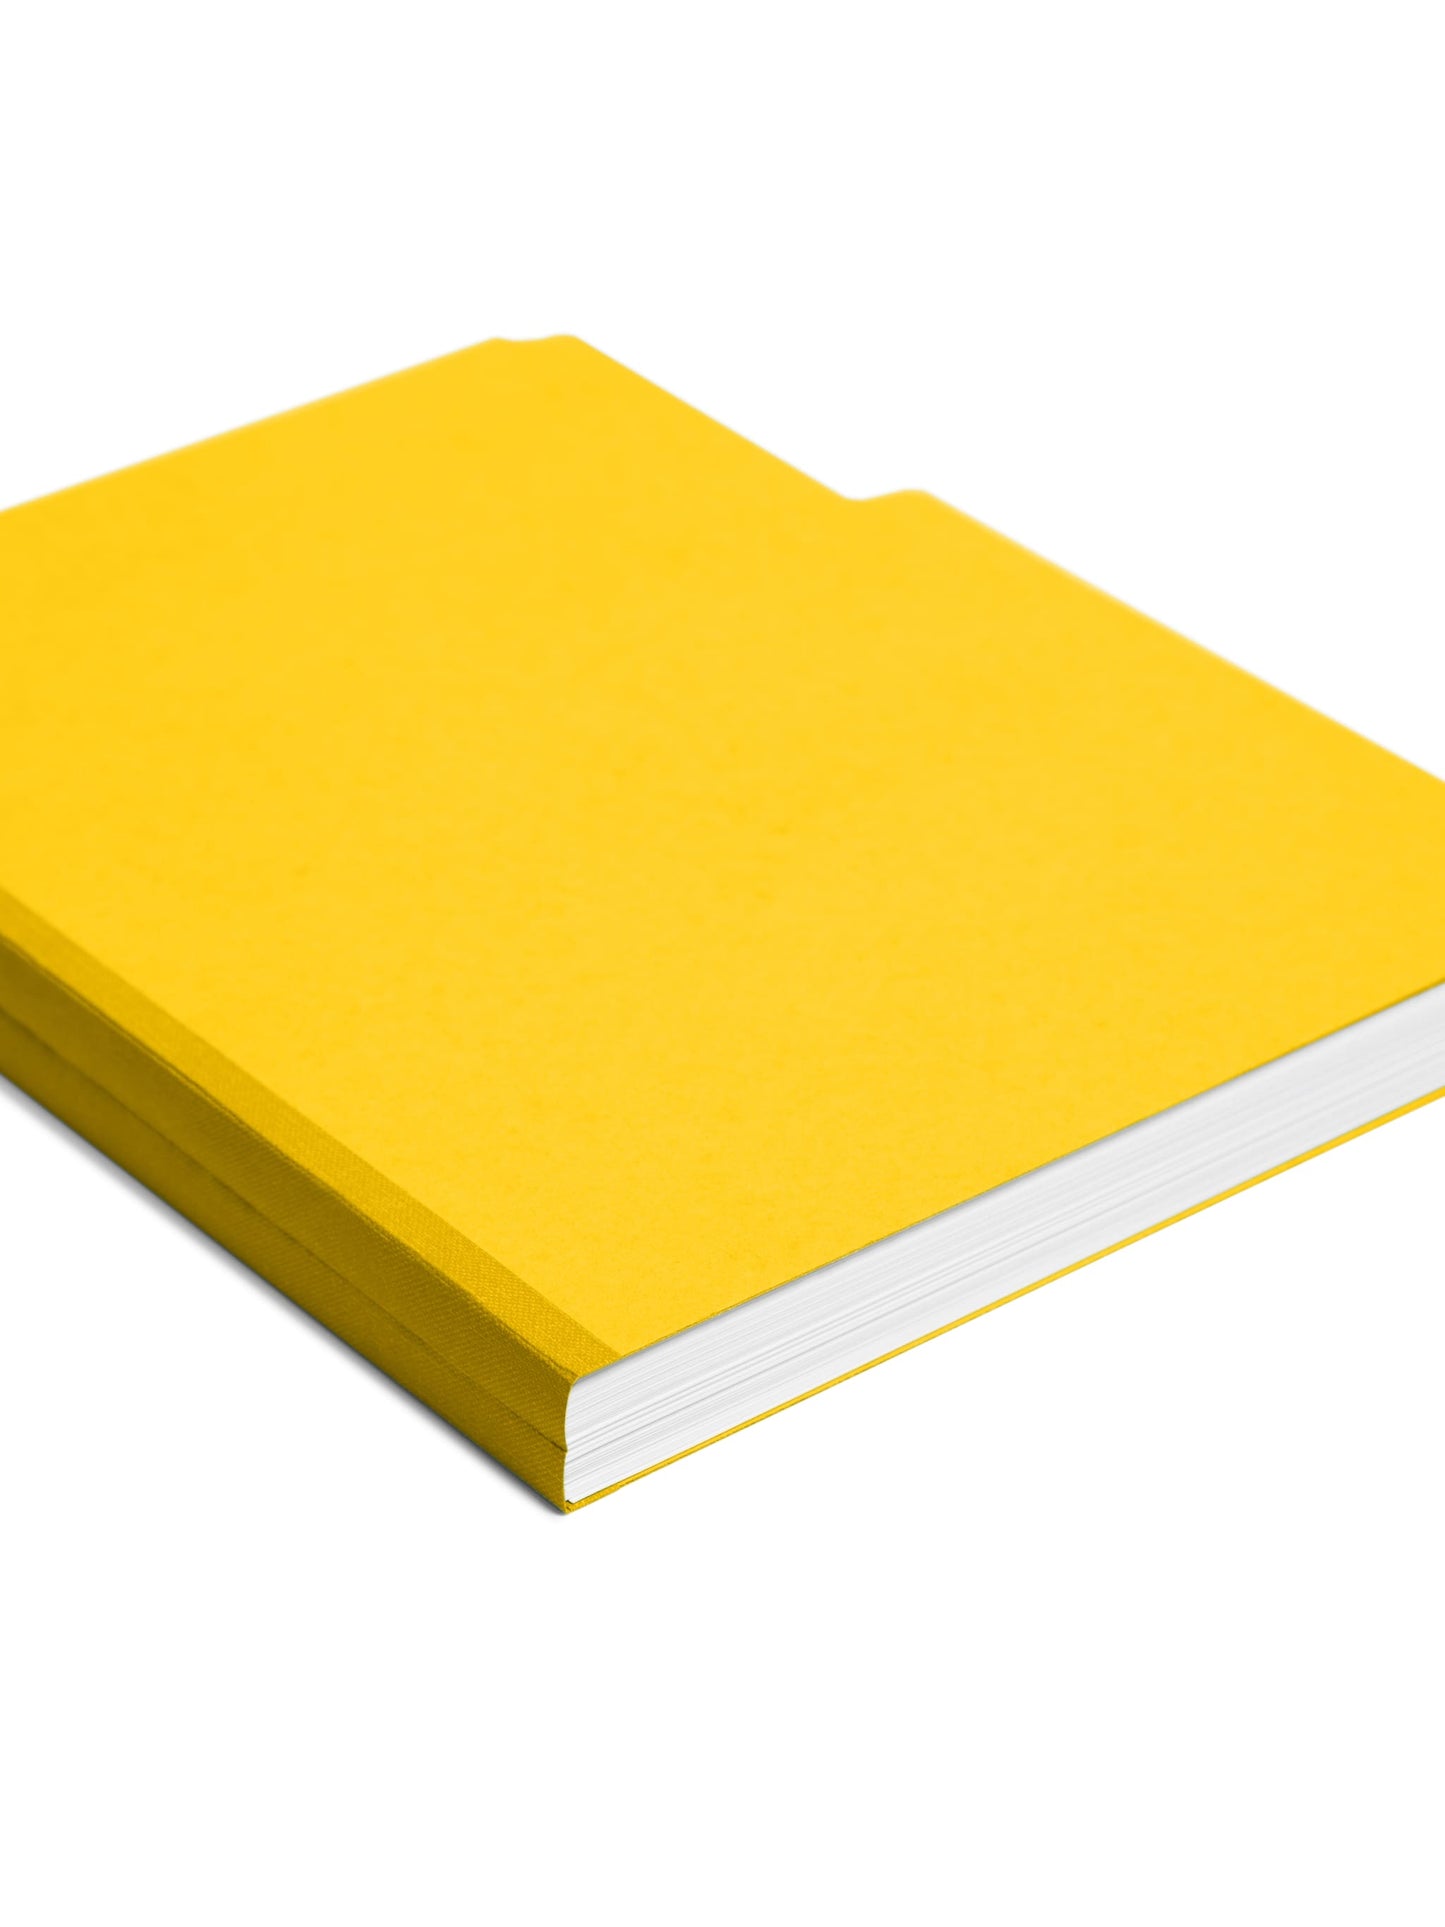 Pressboard File Folder, 1 inch Expansion, 1/3-Cut Tab, Yellow Color, Letter Size, Set of 25, 086486215626